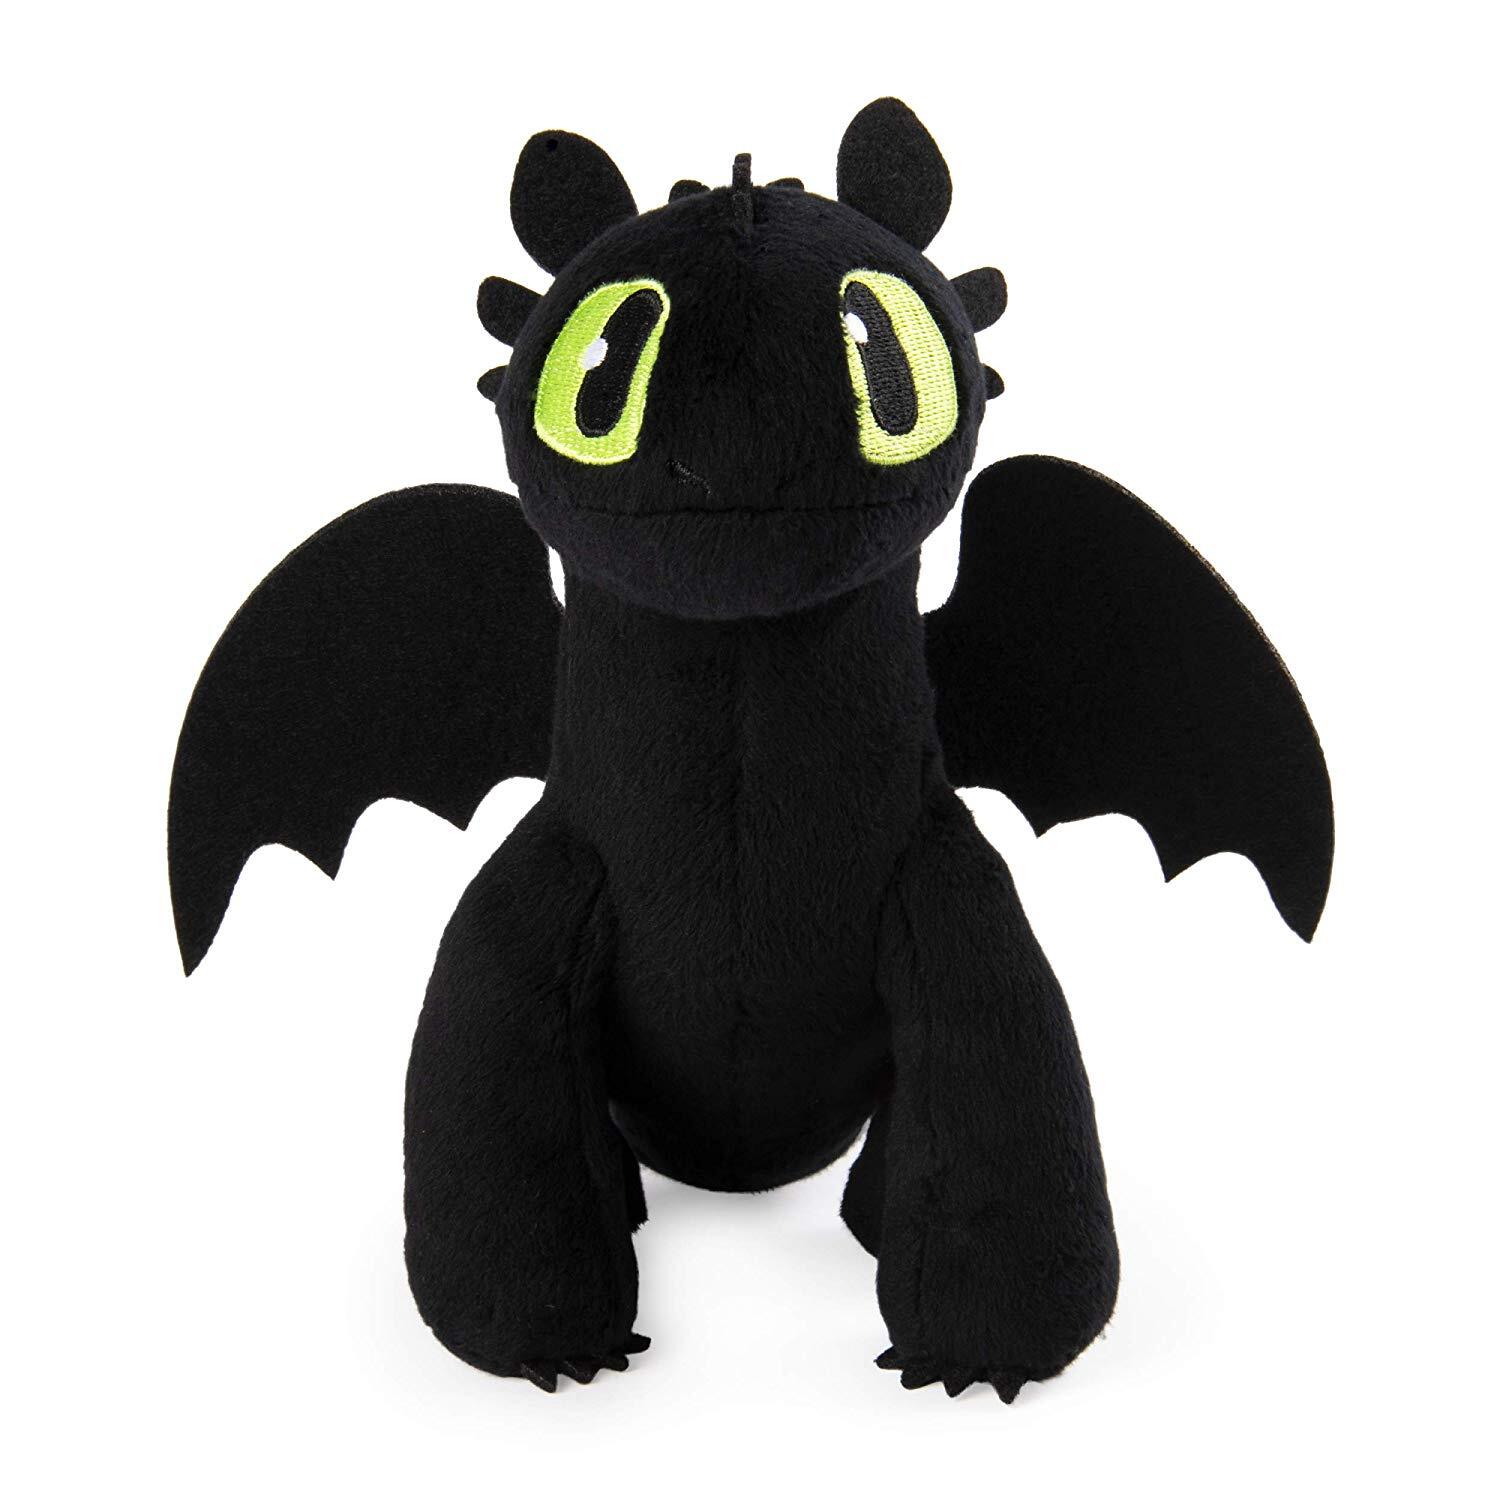 toothless dragon stuffed toy